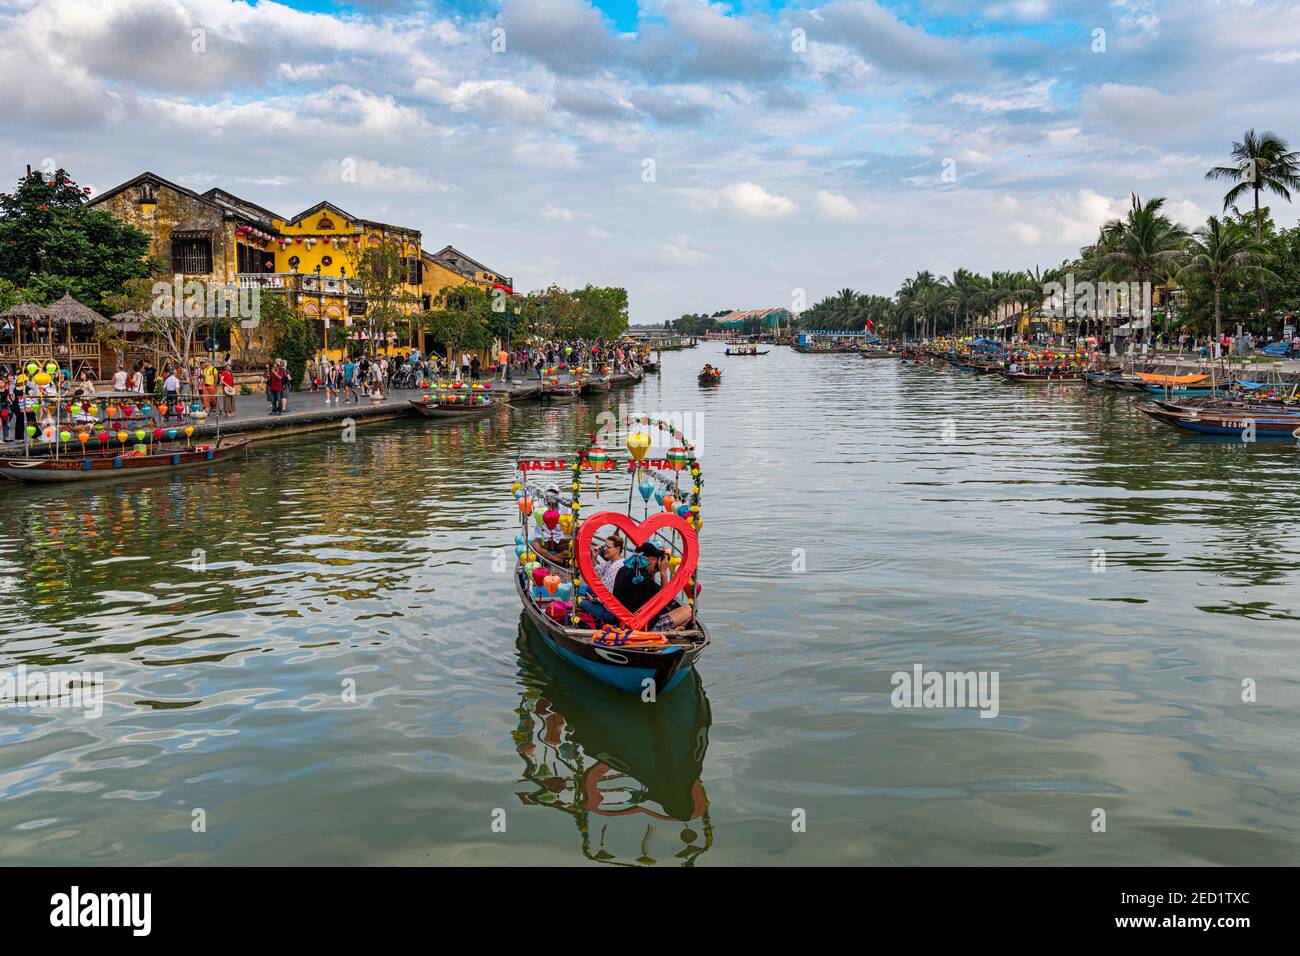 Boat with heart, River front, old town, Hoi An, Vietnam Stock Photo